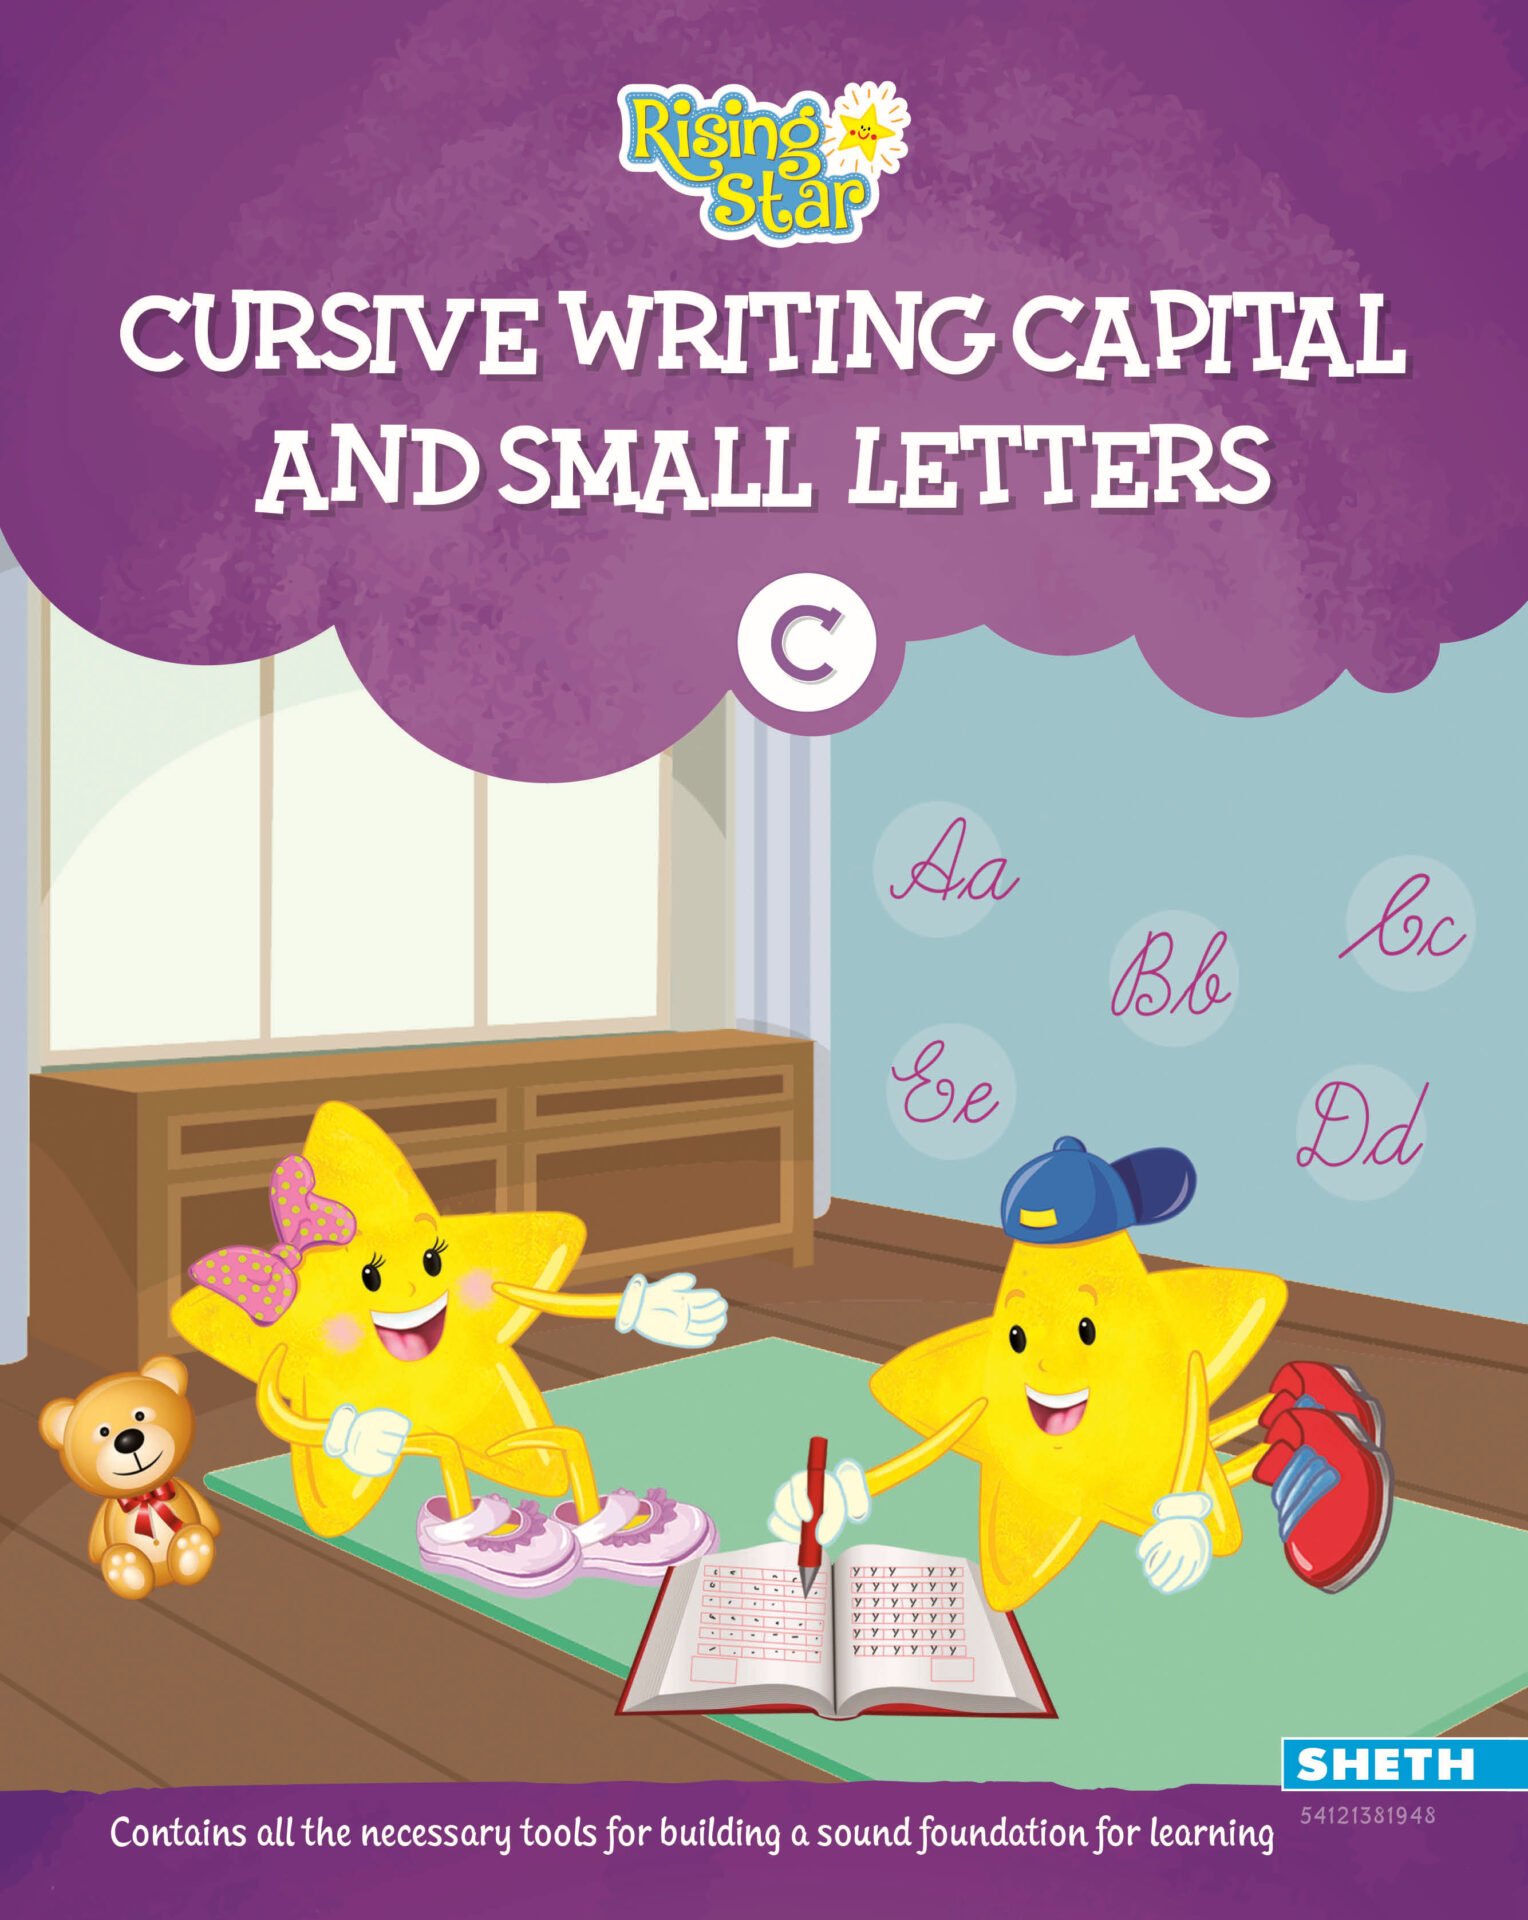 Rising Star Cursive Writing Capital and Small Letters C 1 1